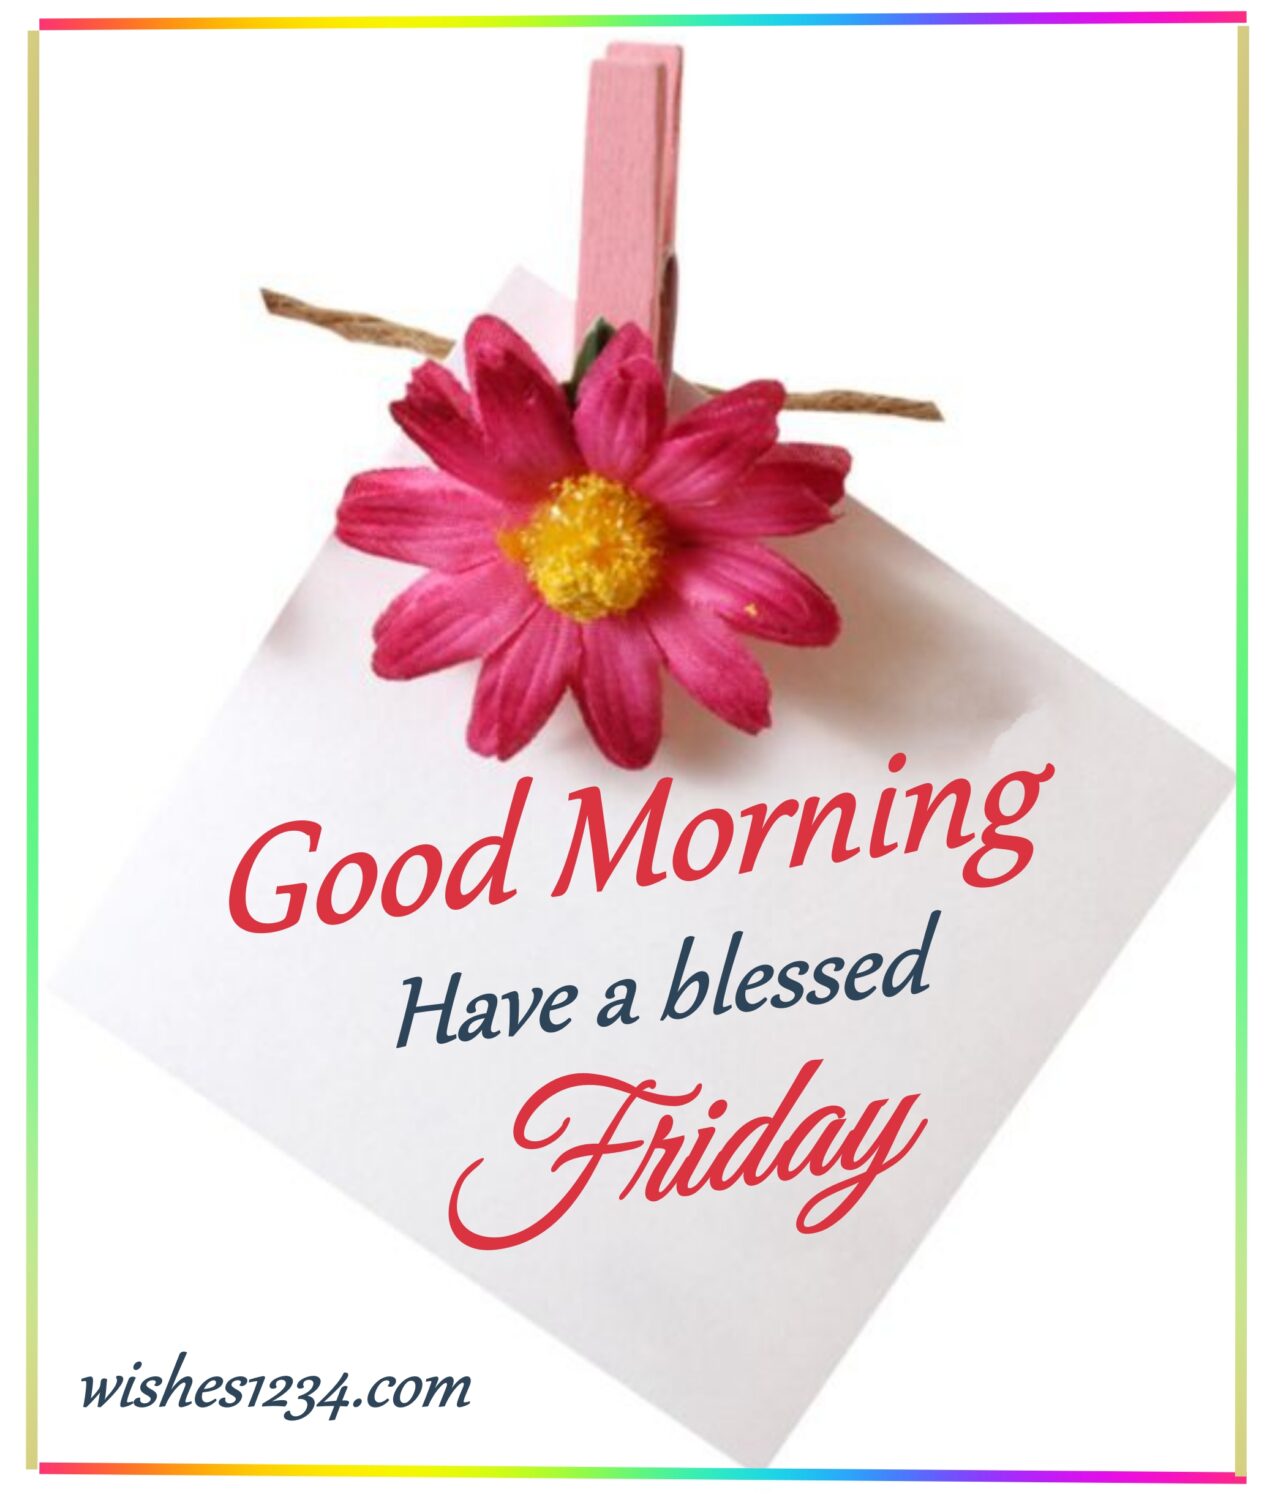 Hanging paper with pink daisy flower, Friday Quotes | Good Morning Friday | Happy Friday | Blessed Friday Quotes.